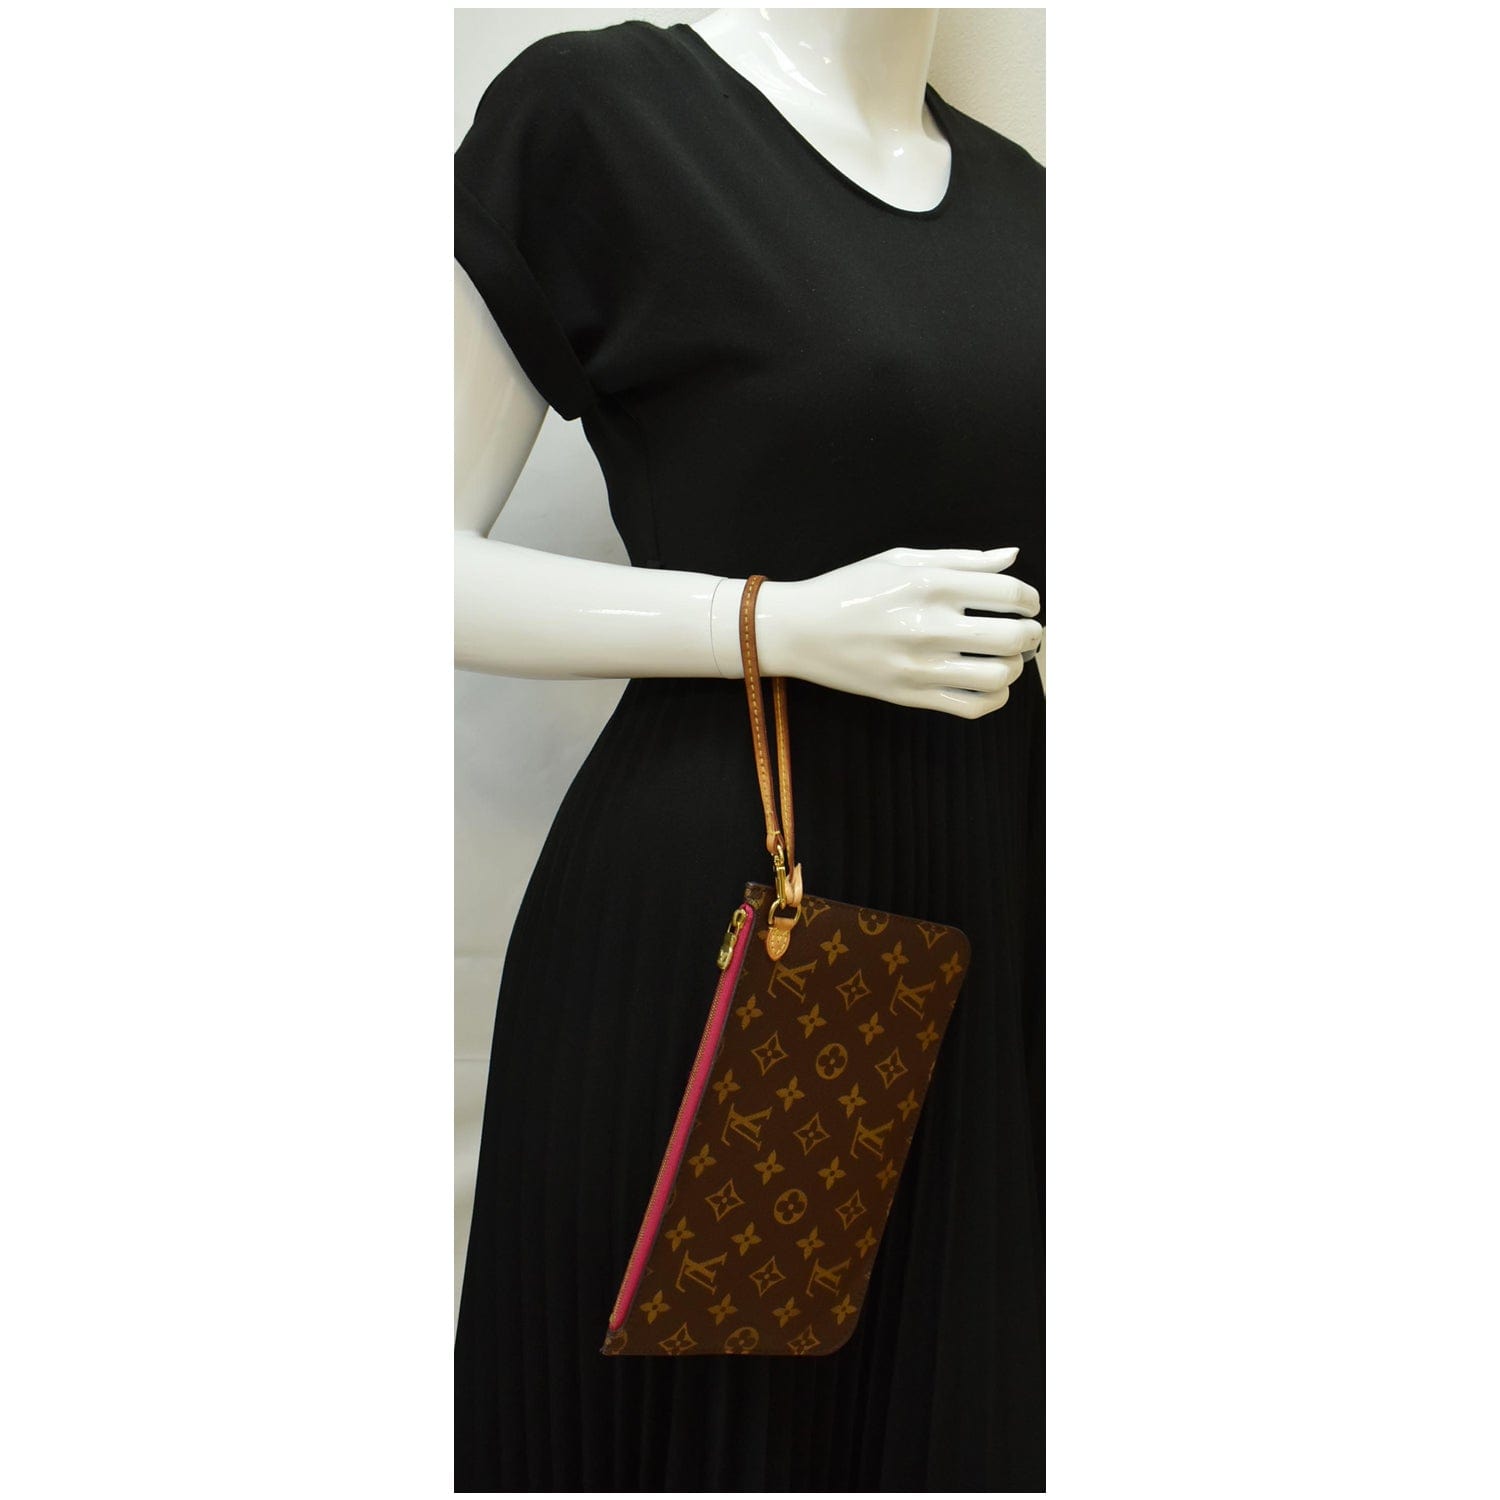 LOUIS VUITTON Brown Monogram Neverfull With a pouch, Canvas MM